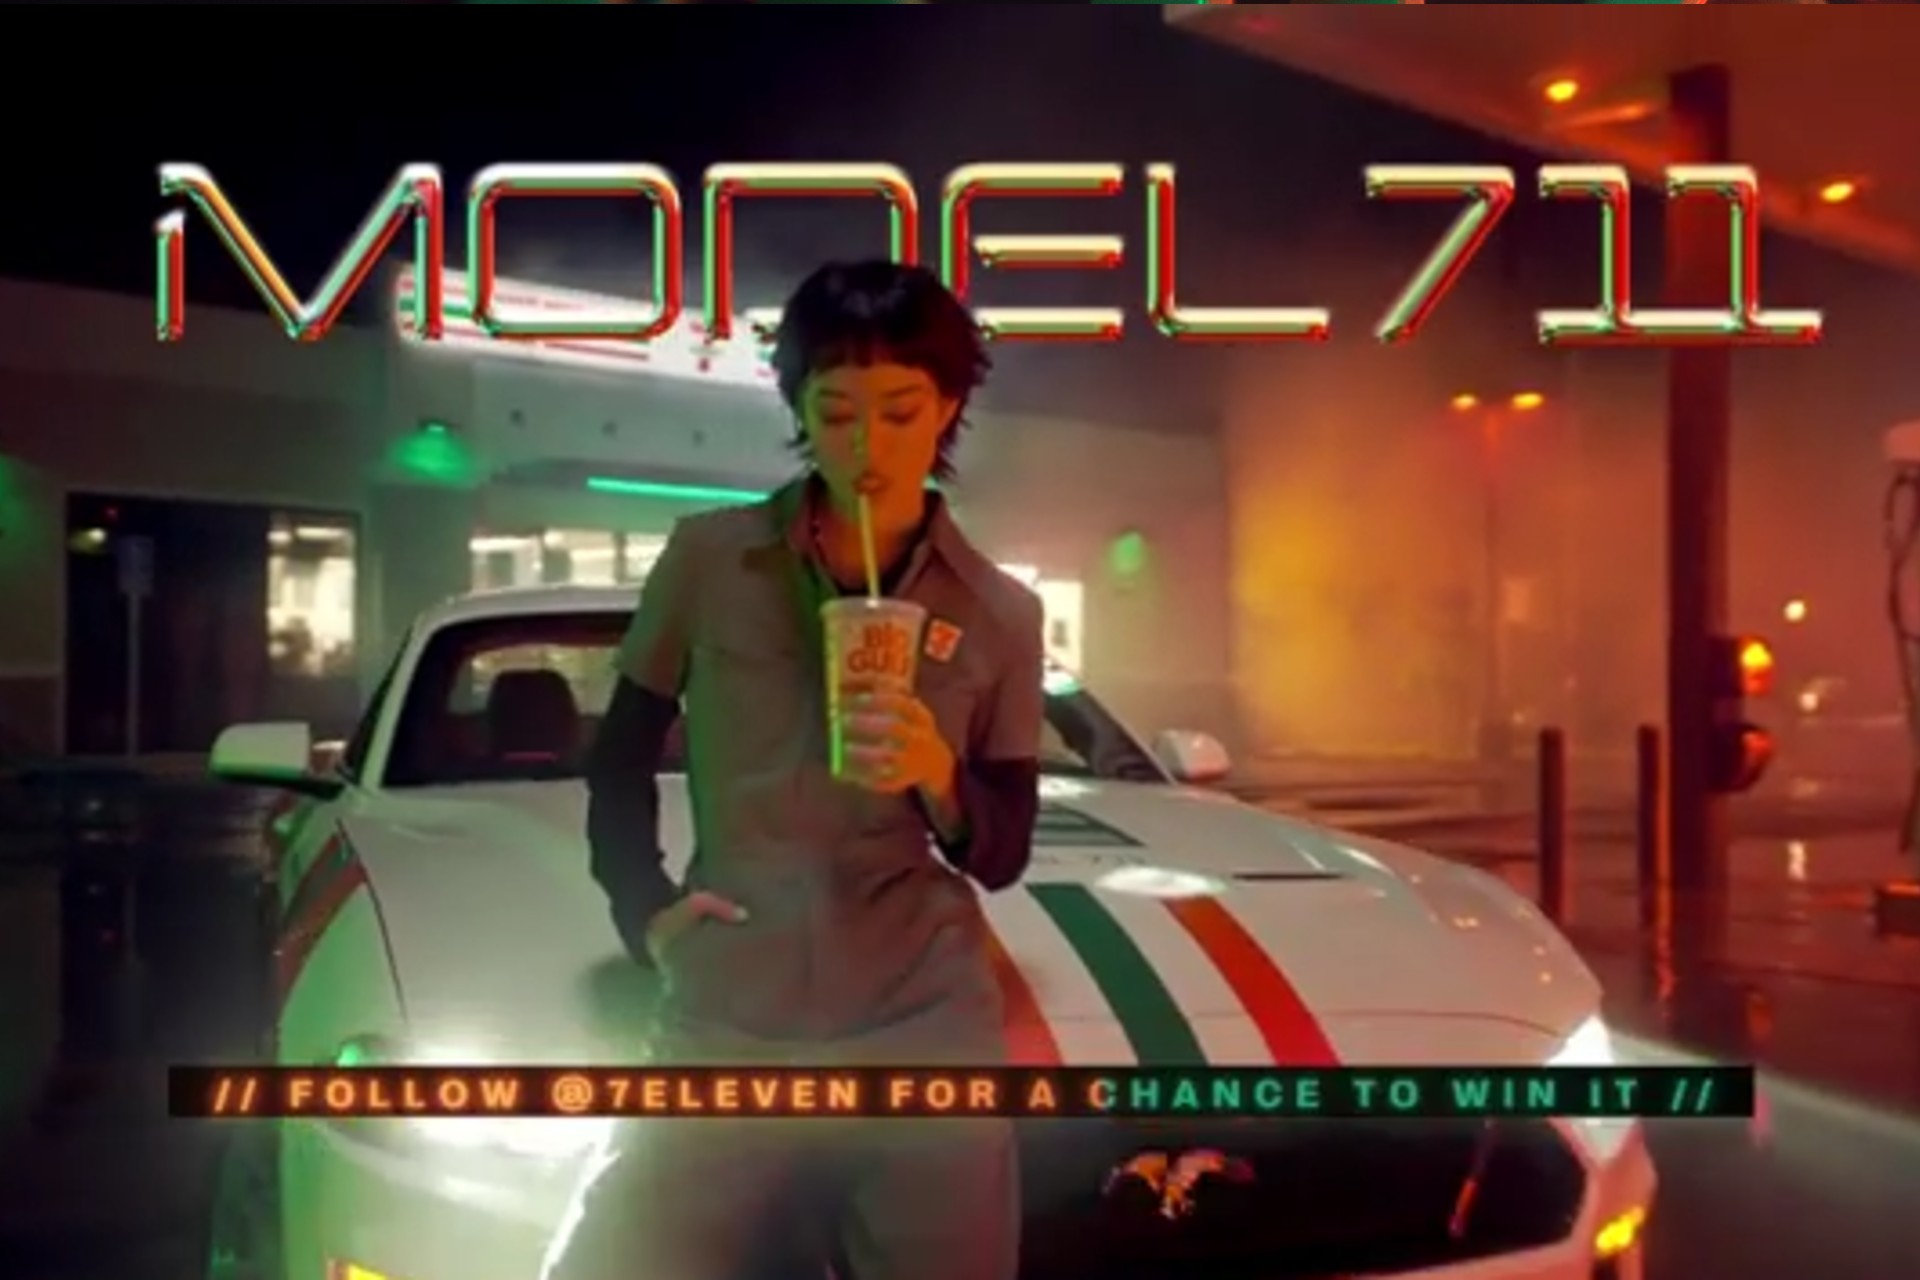 Built by Fans and Inspired by Snacks: 7-Eleven Unveils Completed Model 711 Car